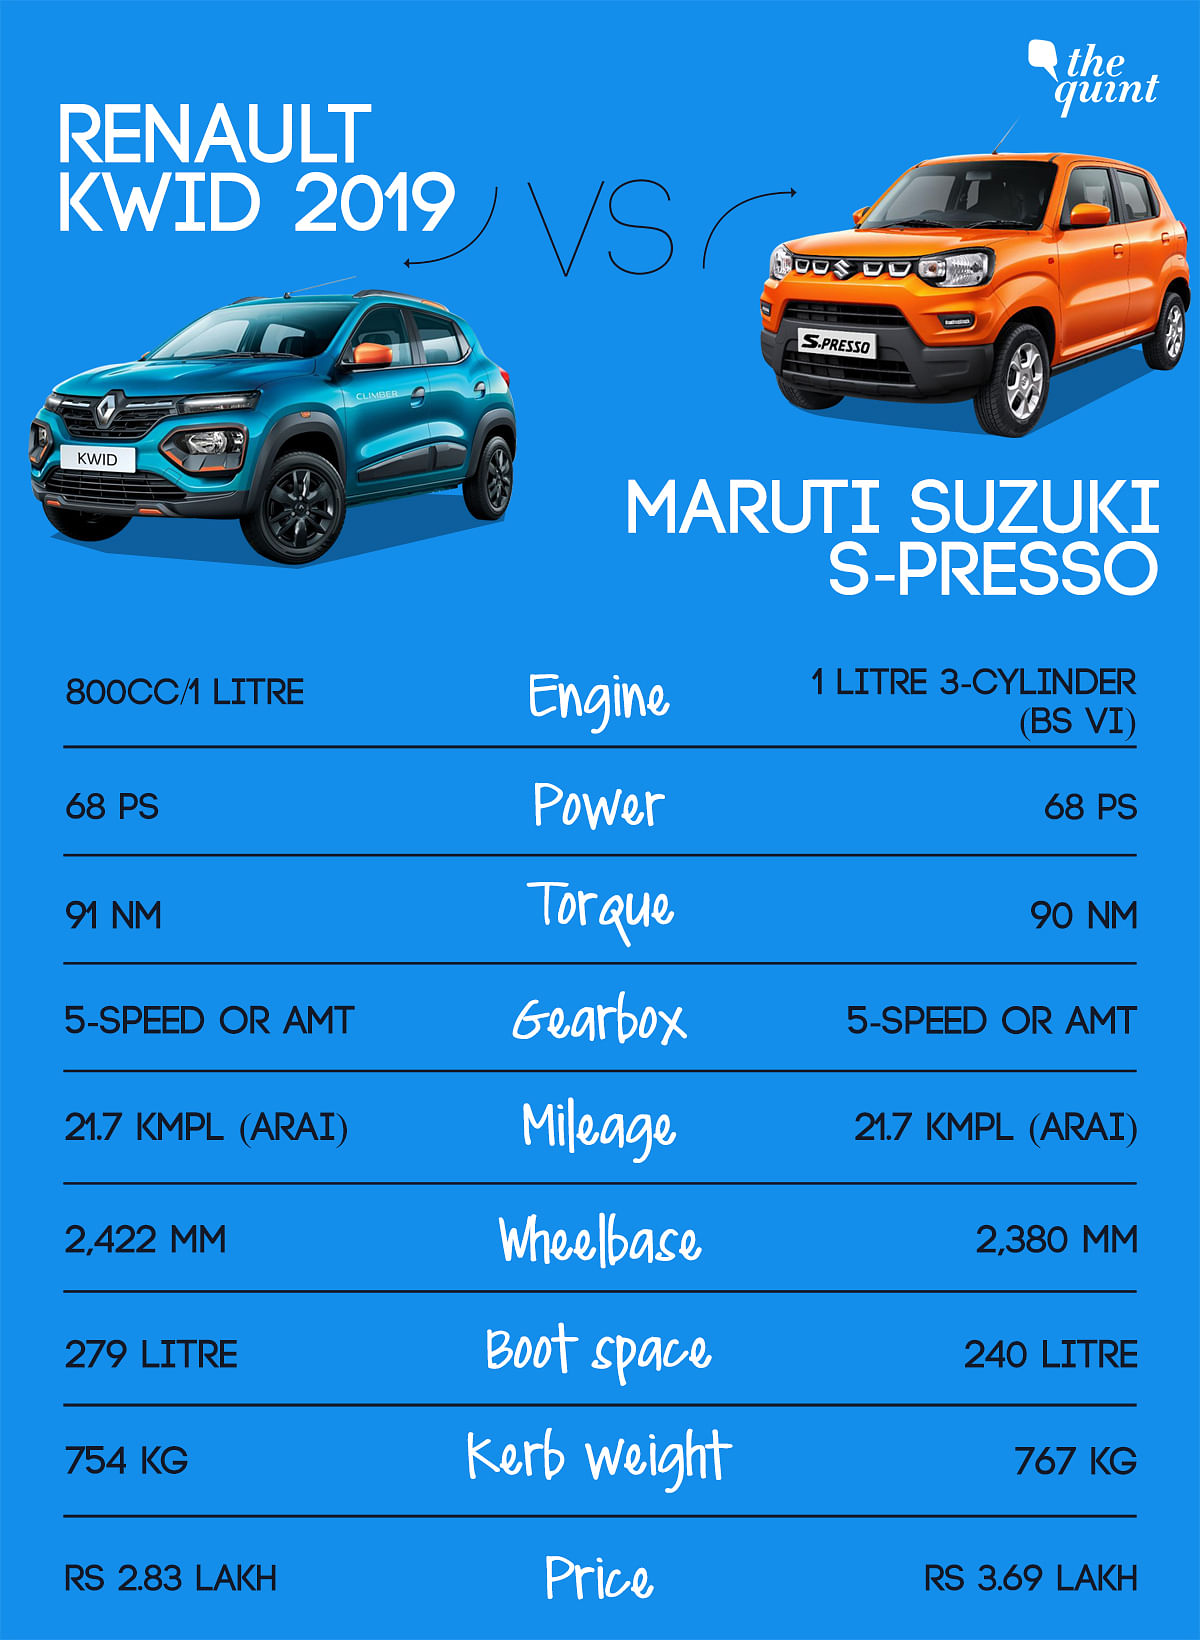 Can the new Maruti Suzuki S-Presso small car compete with the reliable Renault Kwid in the Indian market?